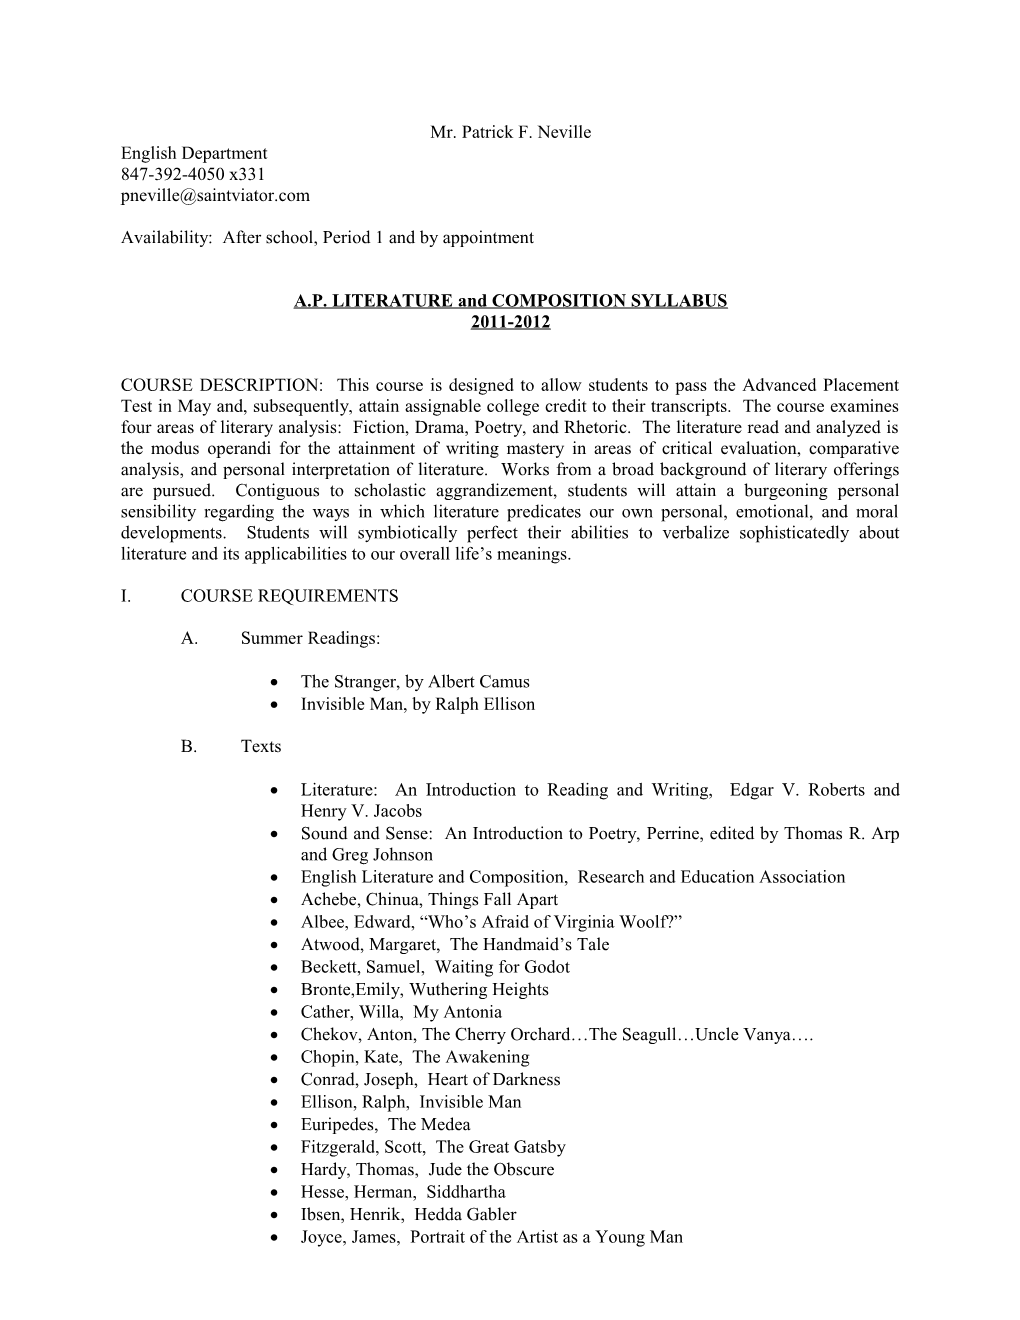 A.P. LITERATURE and COMPOSITION SYLLABUS